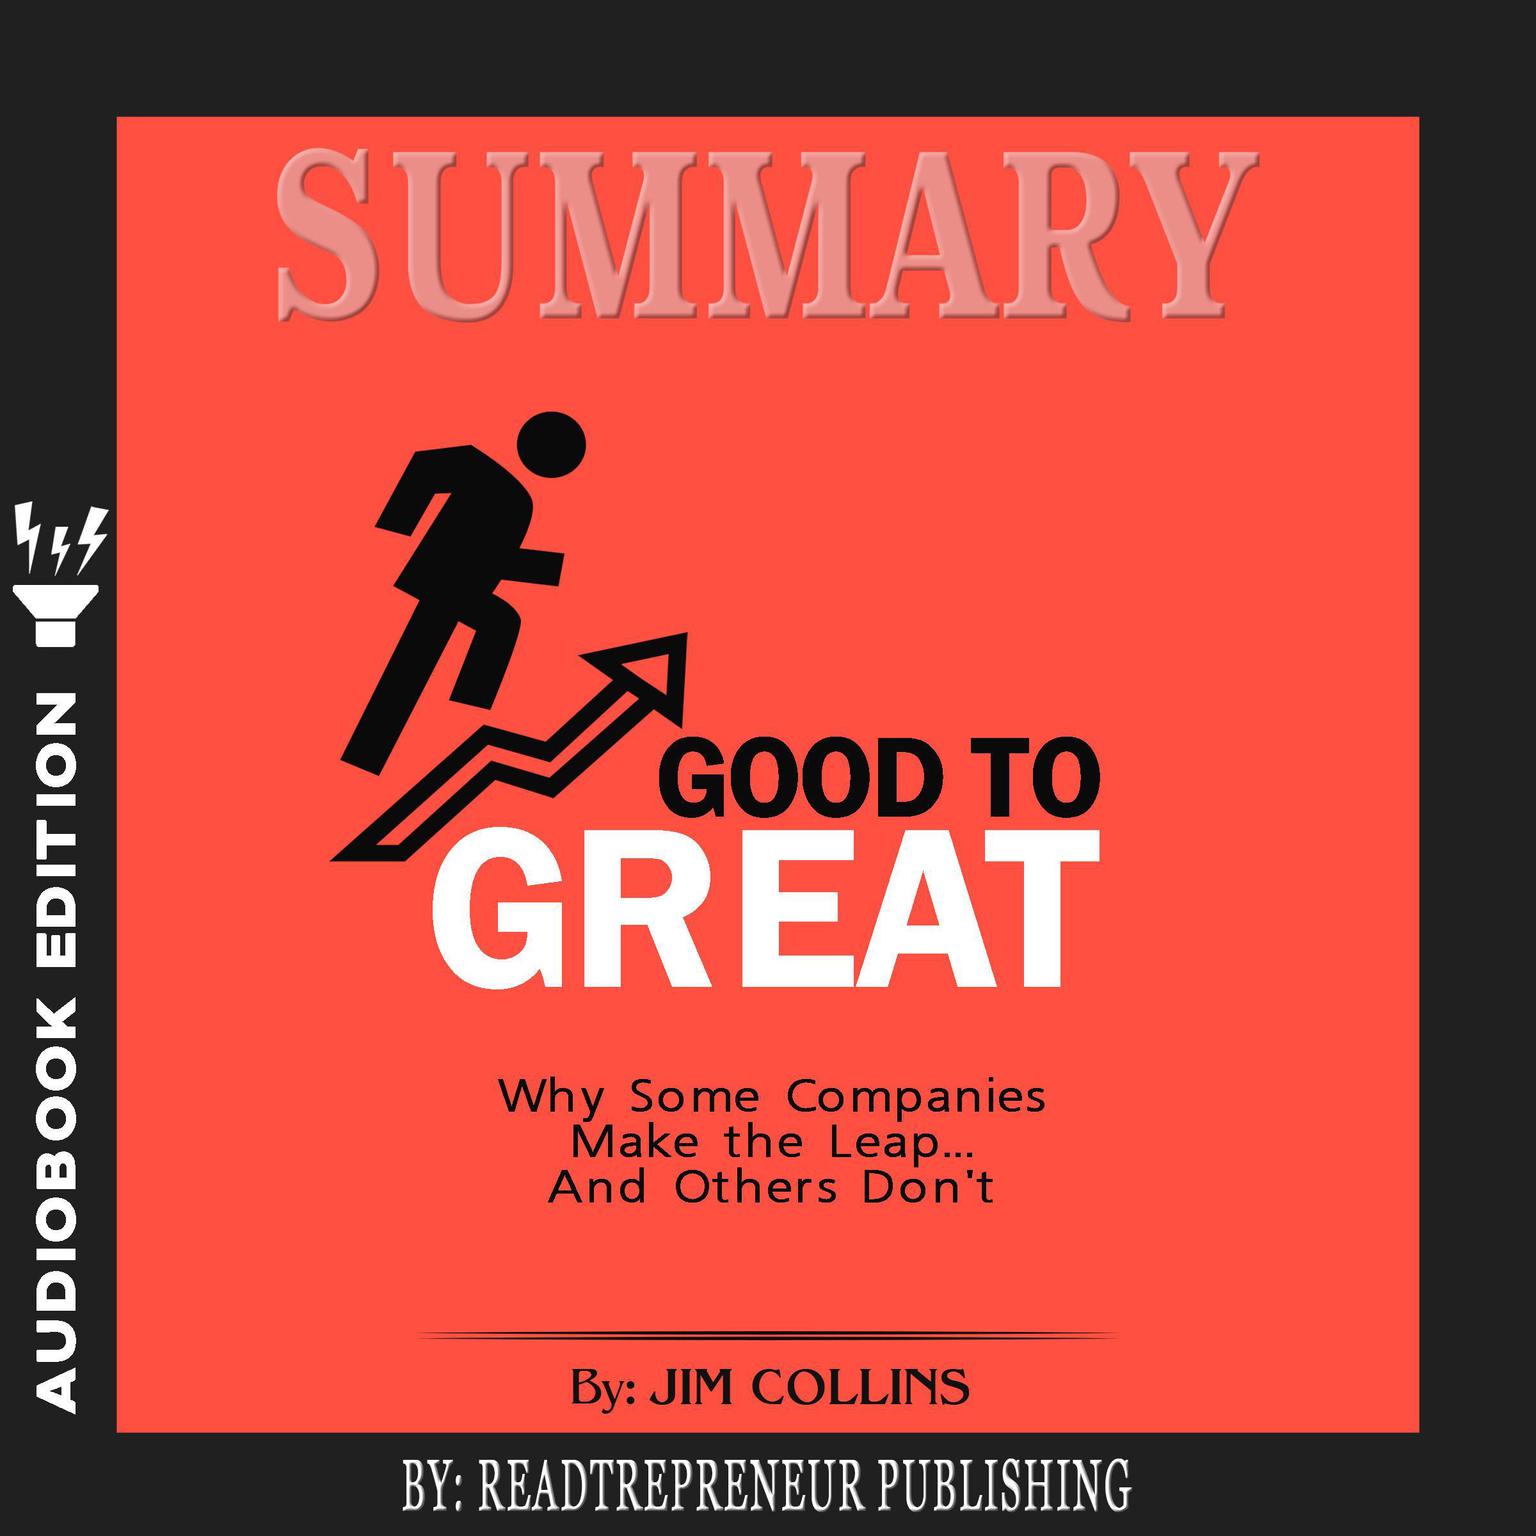 Summary of Good to Great: Why Some Companies Make the Leap...And Others Dont by Jim Collins Audiobook, by Readtrepreneur Publishing